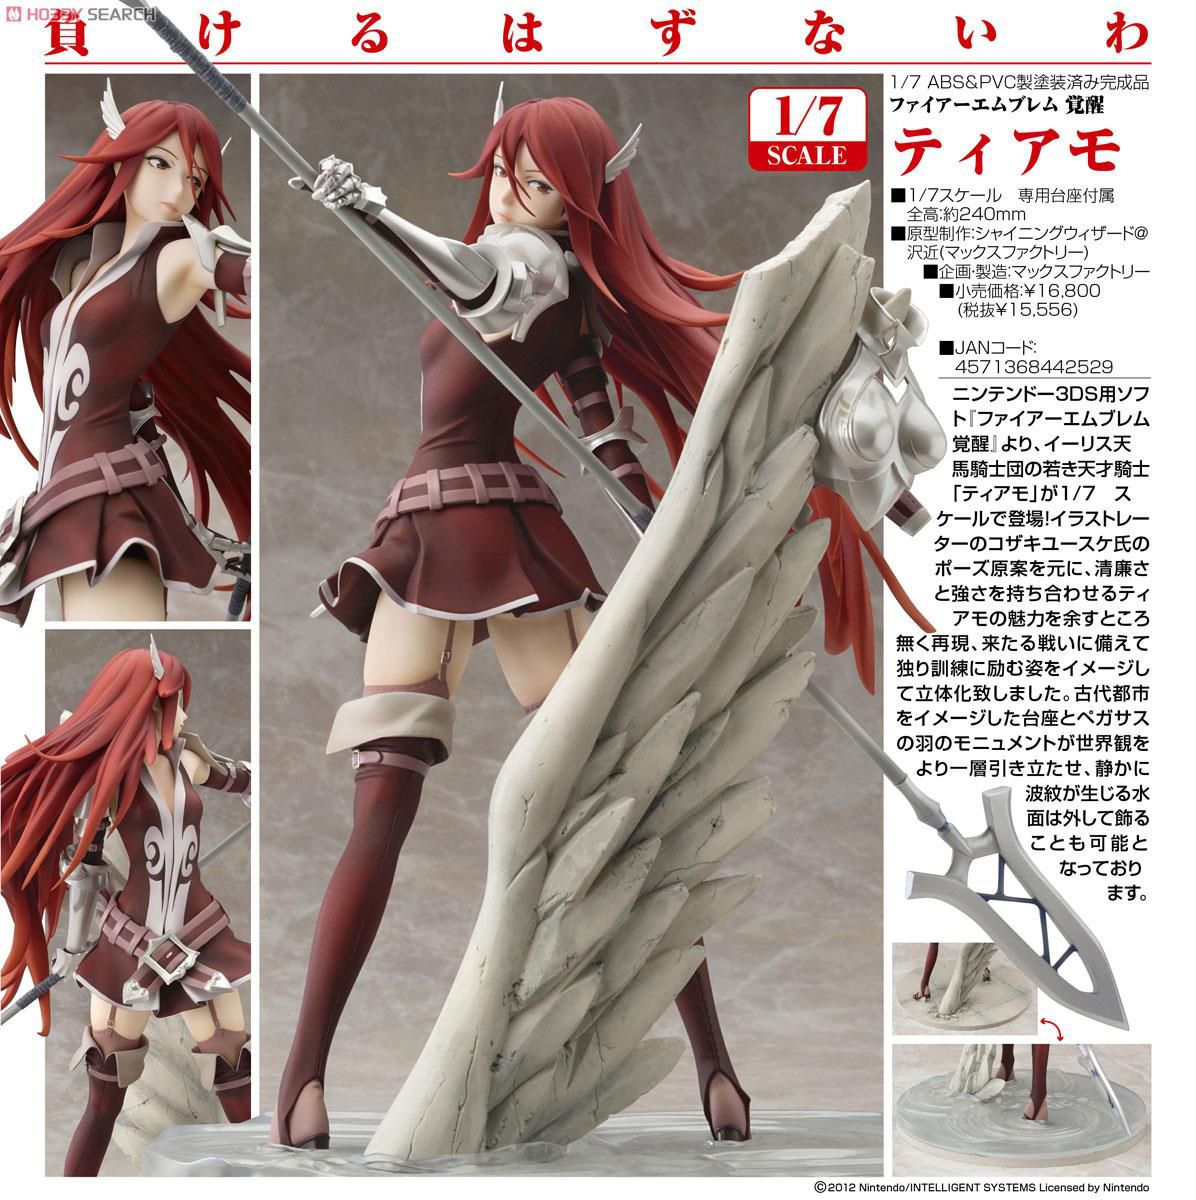 [Sad news] Fire Emblem will release a figure that is too erotic 12